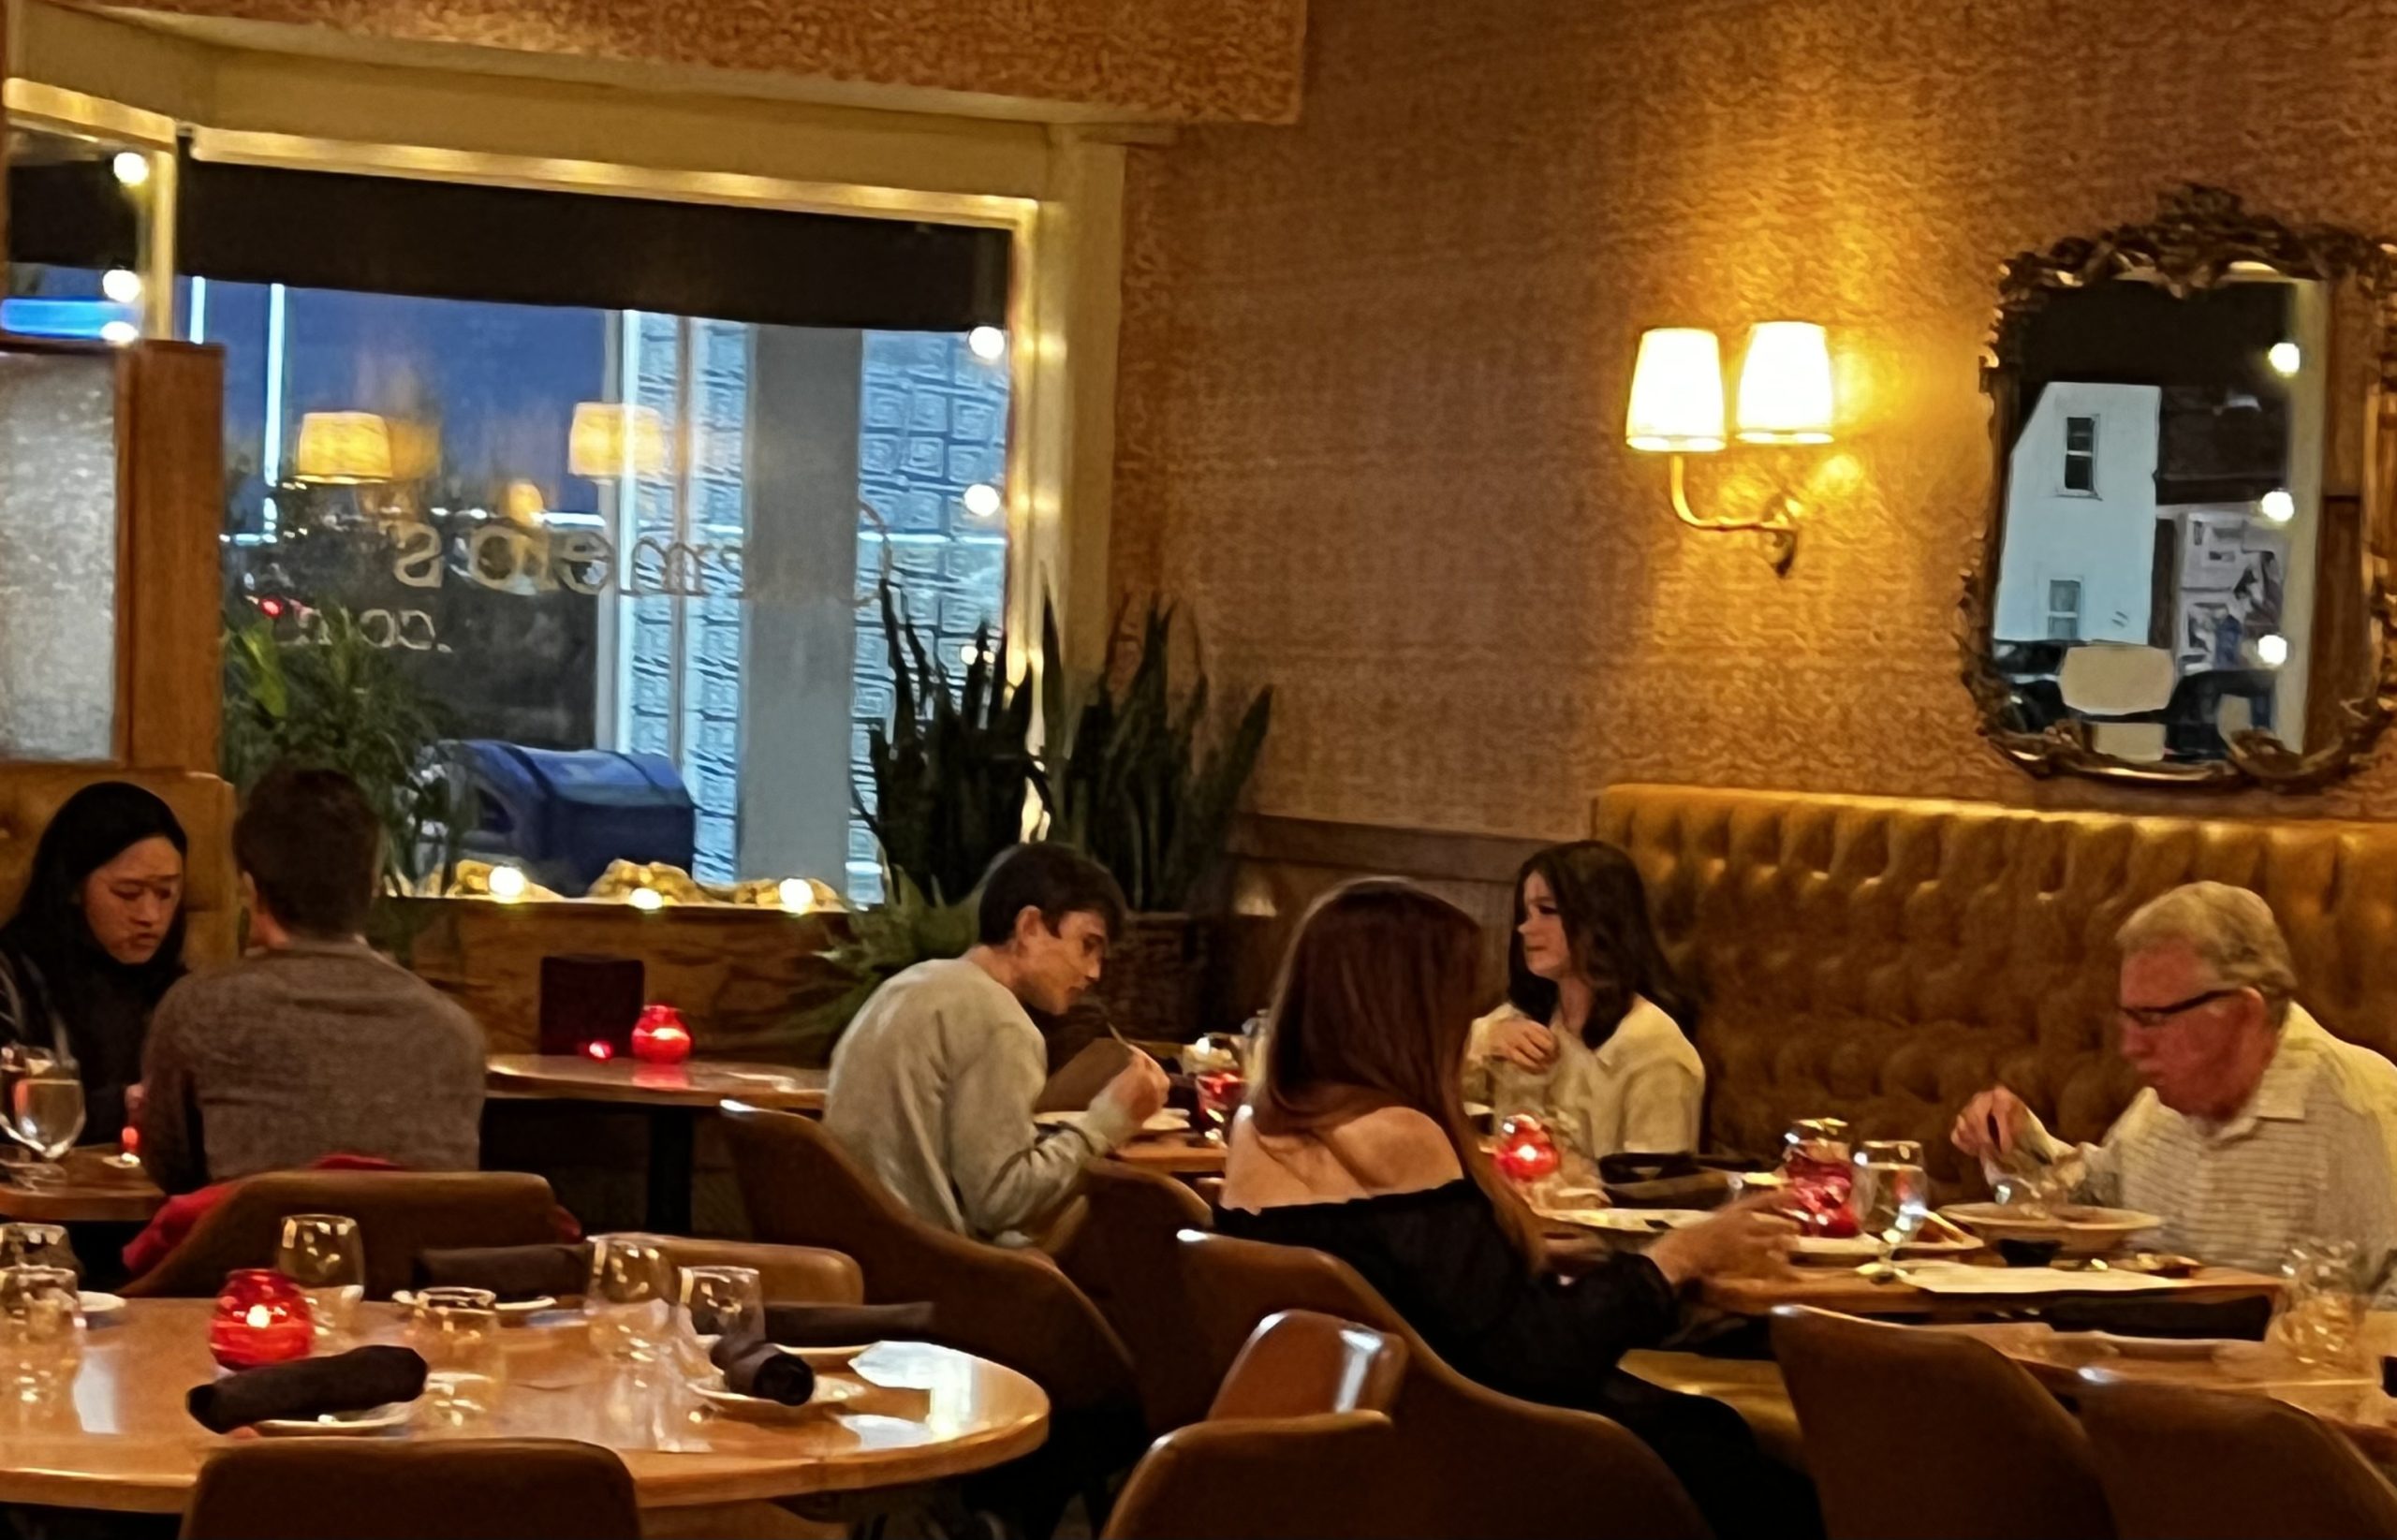 Guests eating in dining room